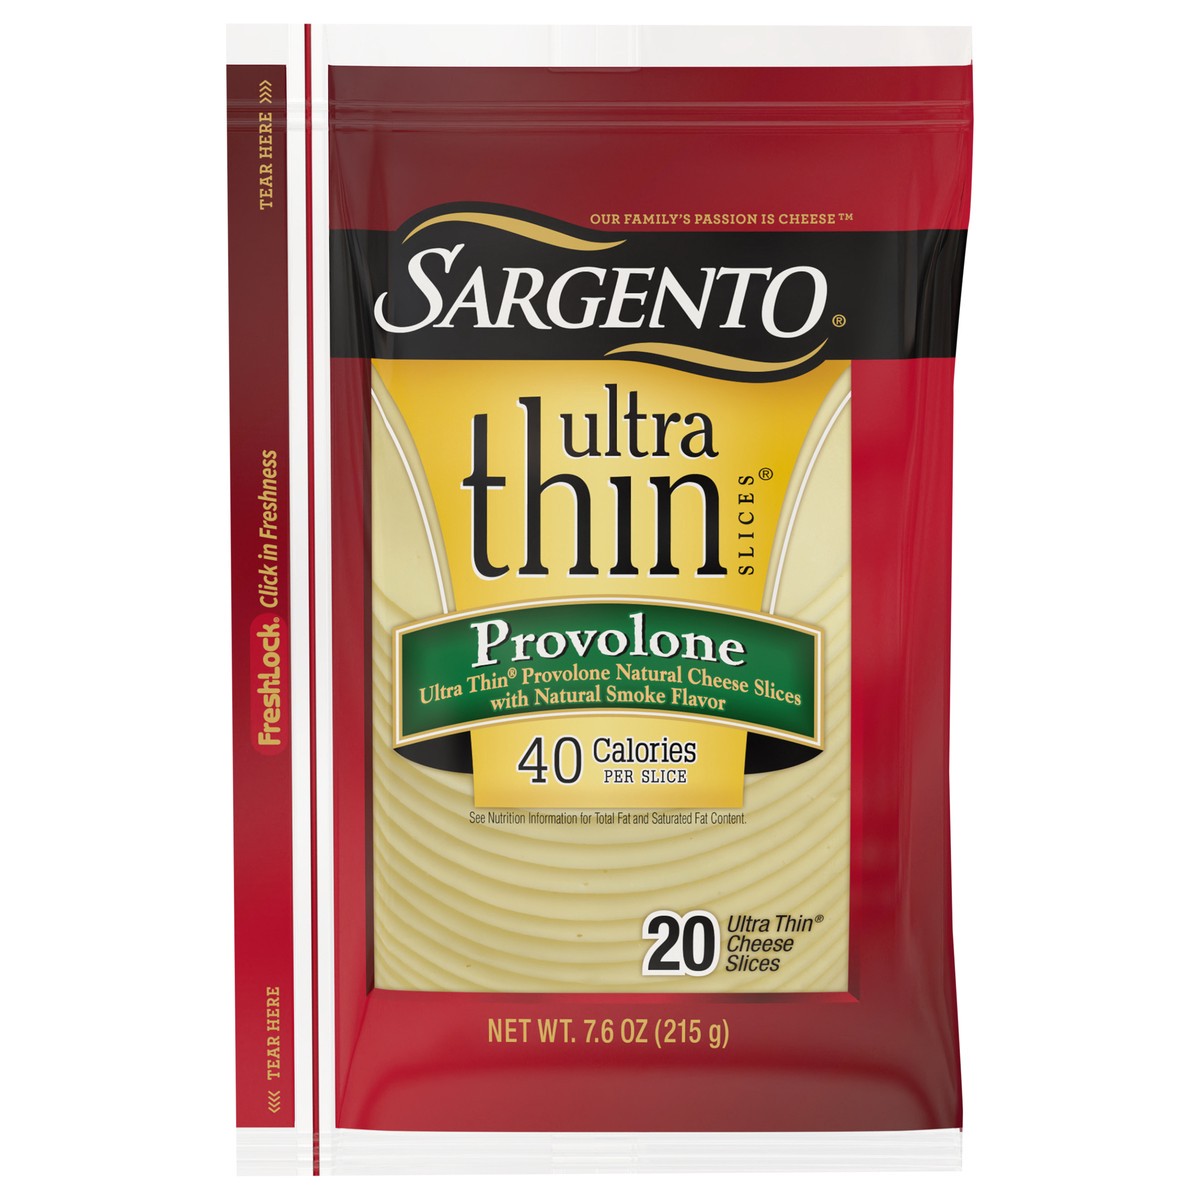 slide 1 of 5, Sargento Provolone Natural Cheese with Natural Smoke Flavor Ultra Thin Slices, 7.6 oz., 20 slices, 7.6 oz